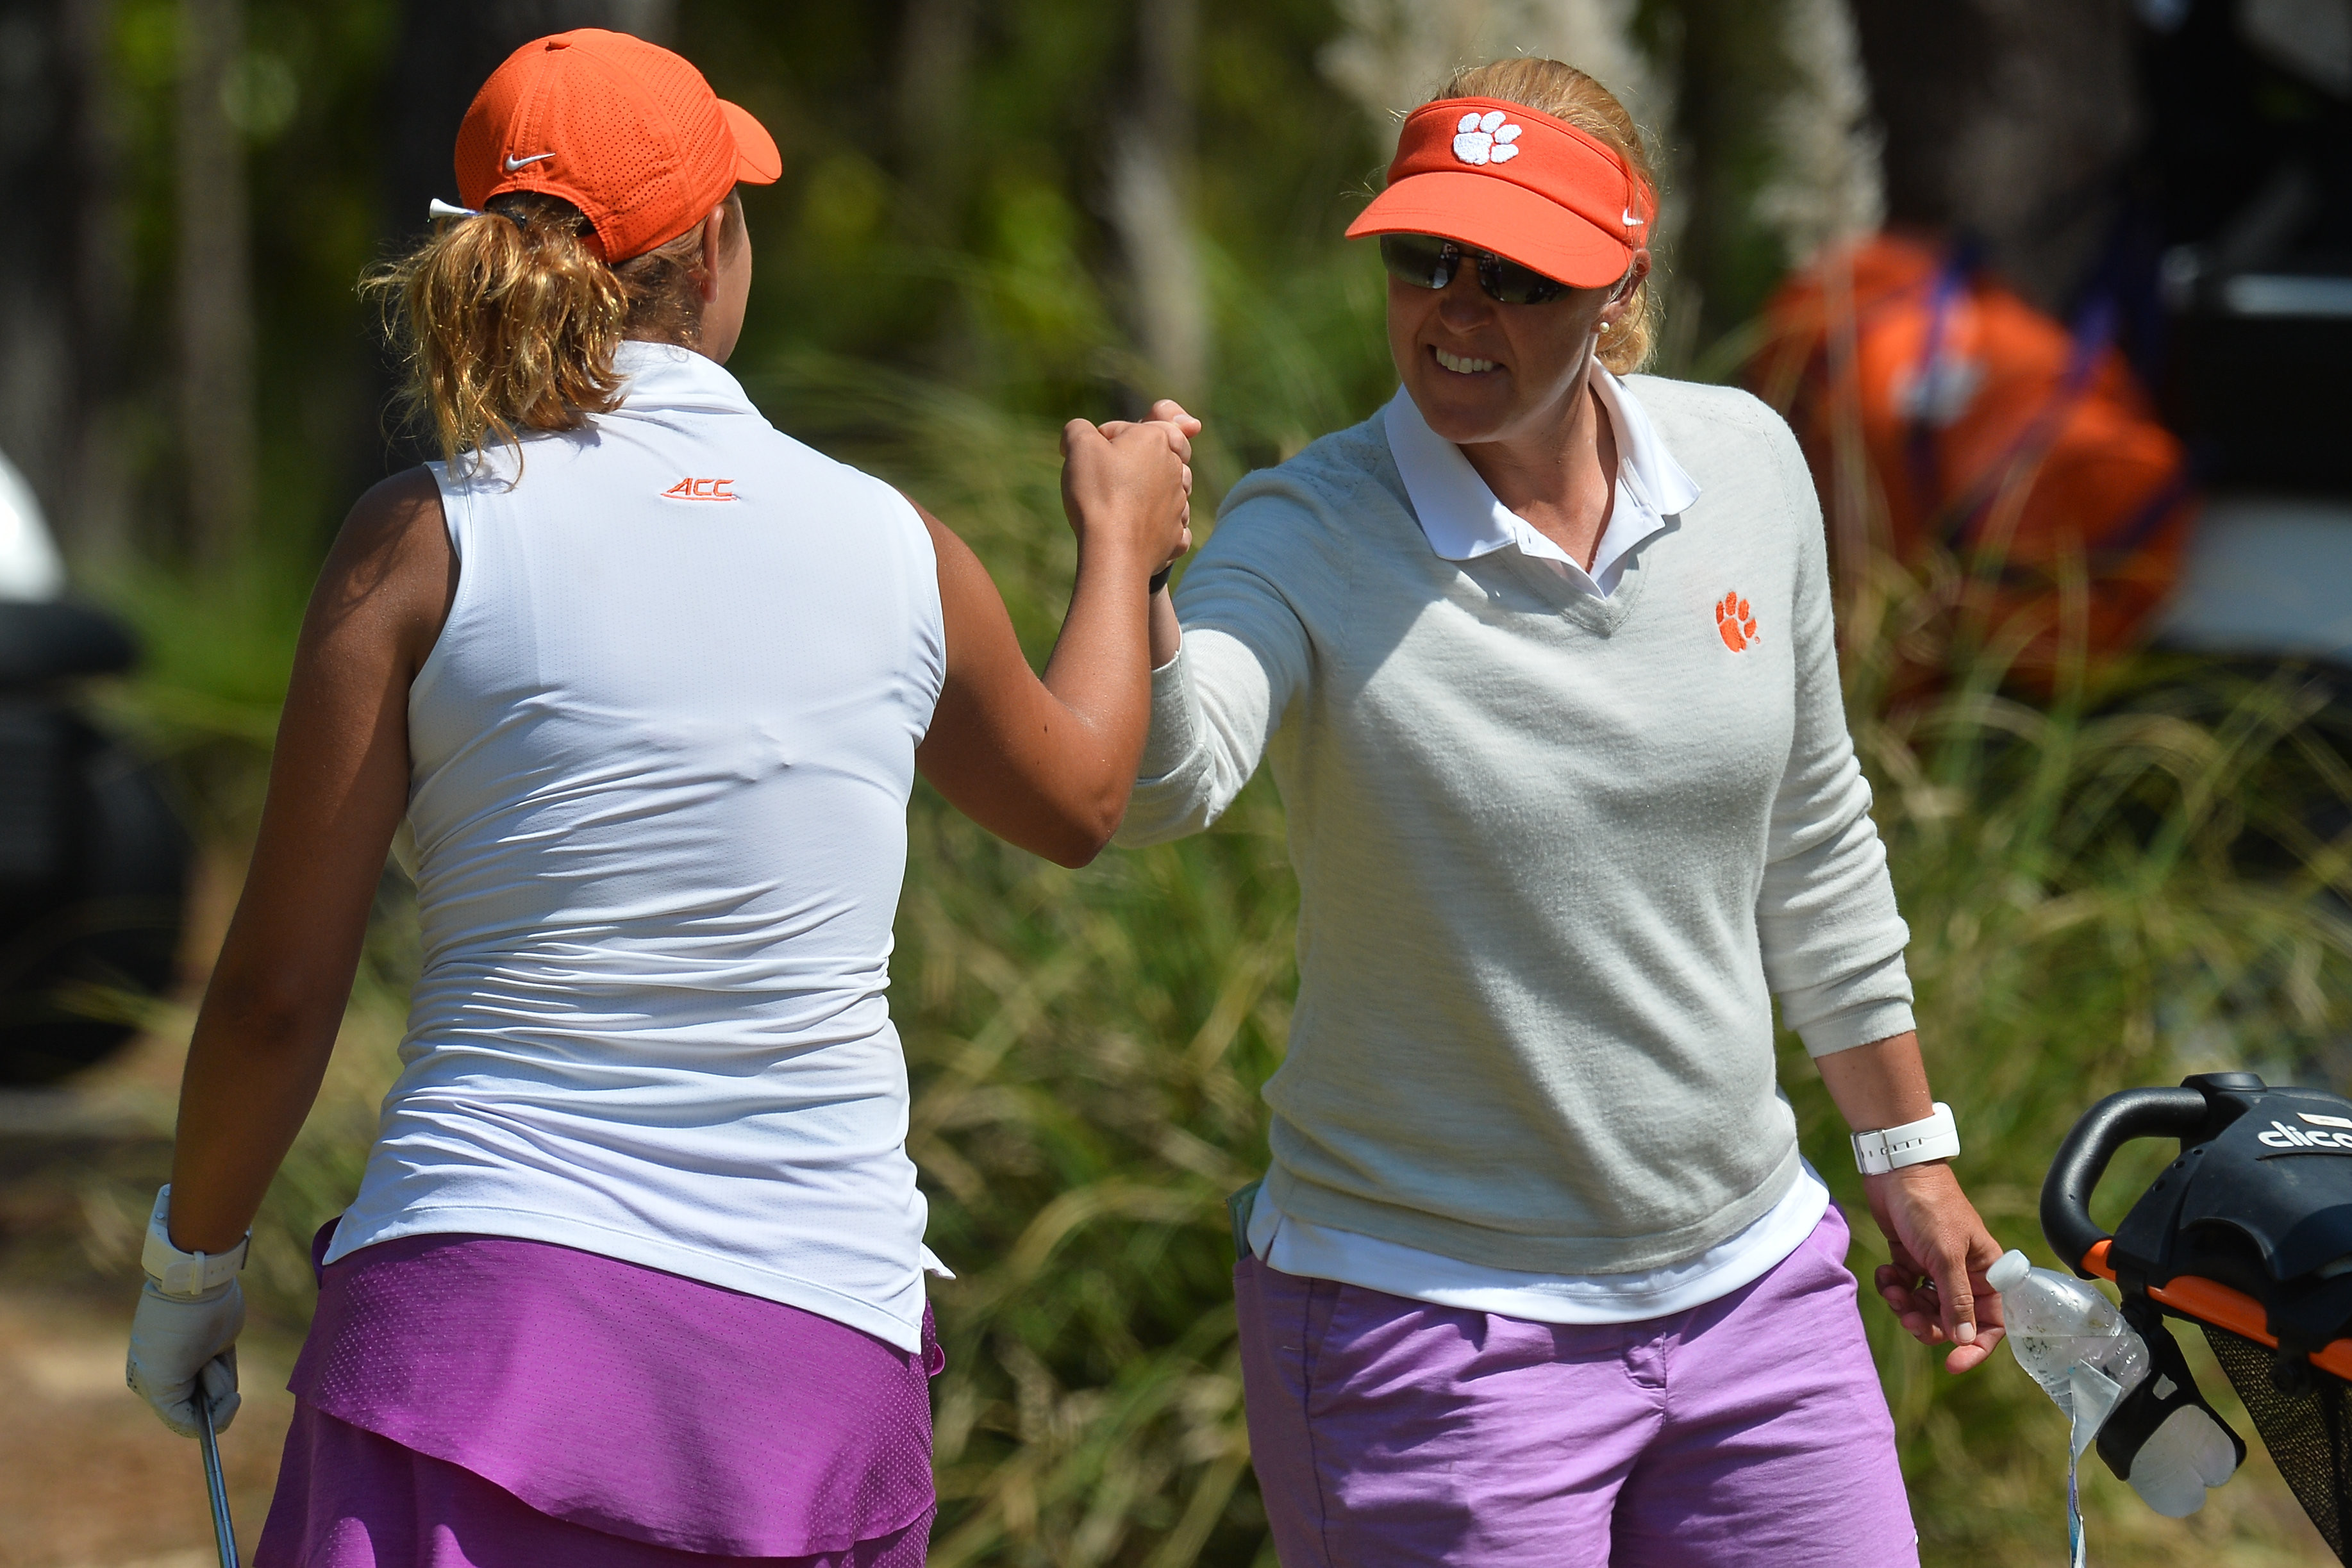 Hester Named Regional Coach of the Year by LPGA